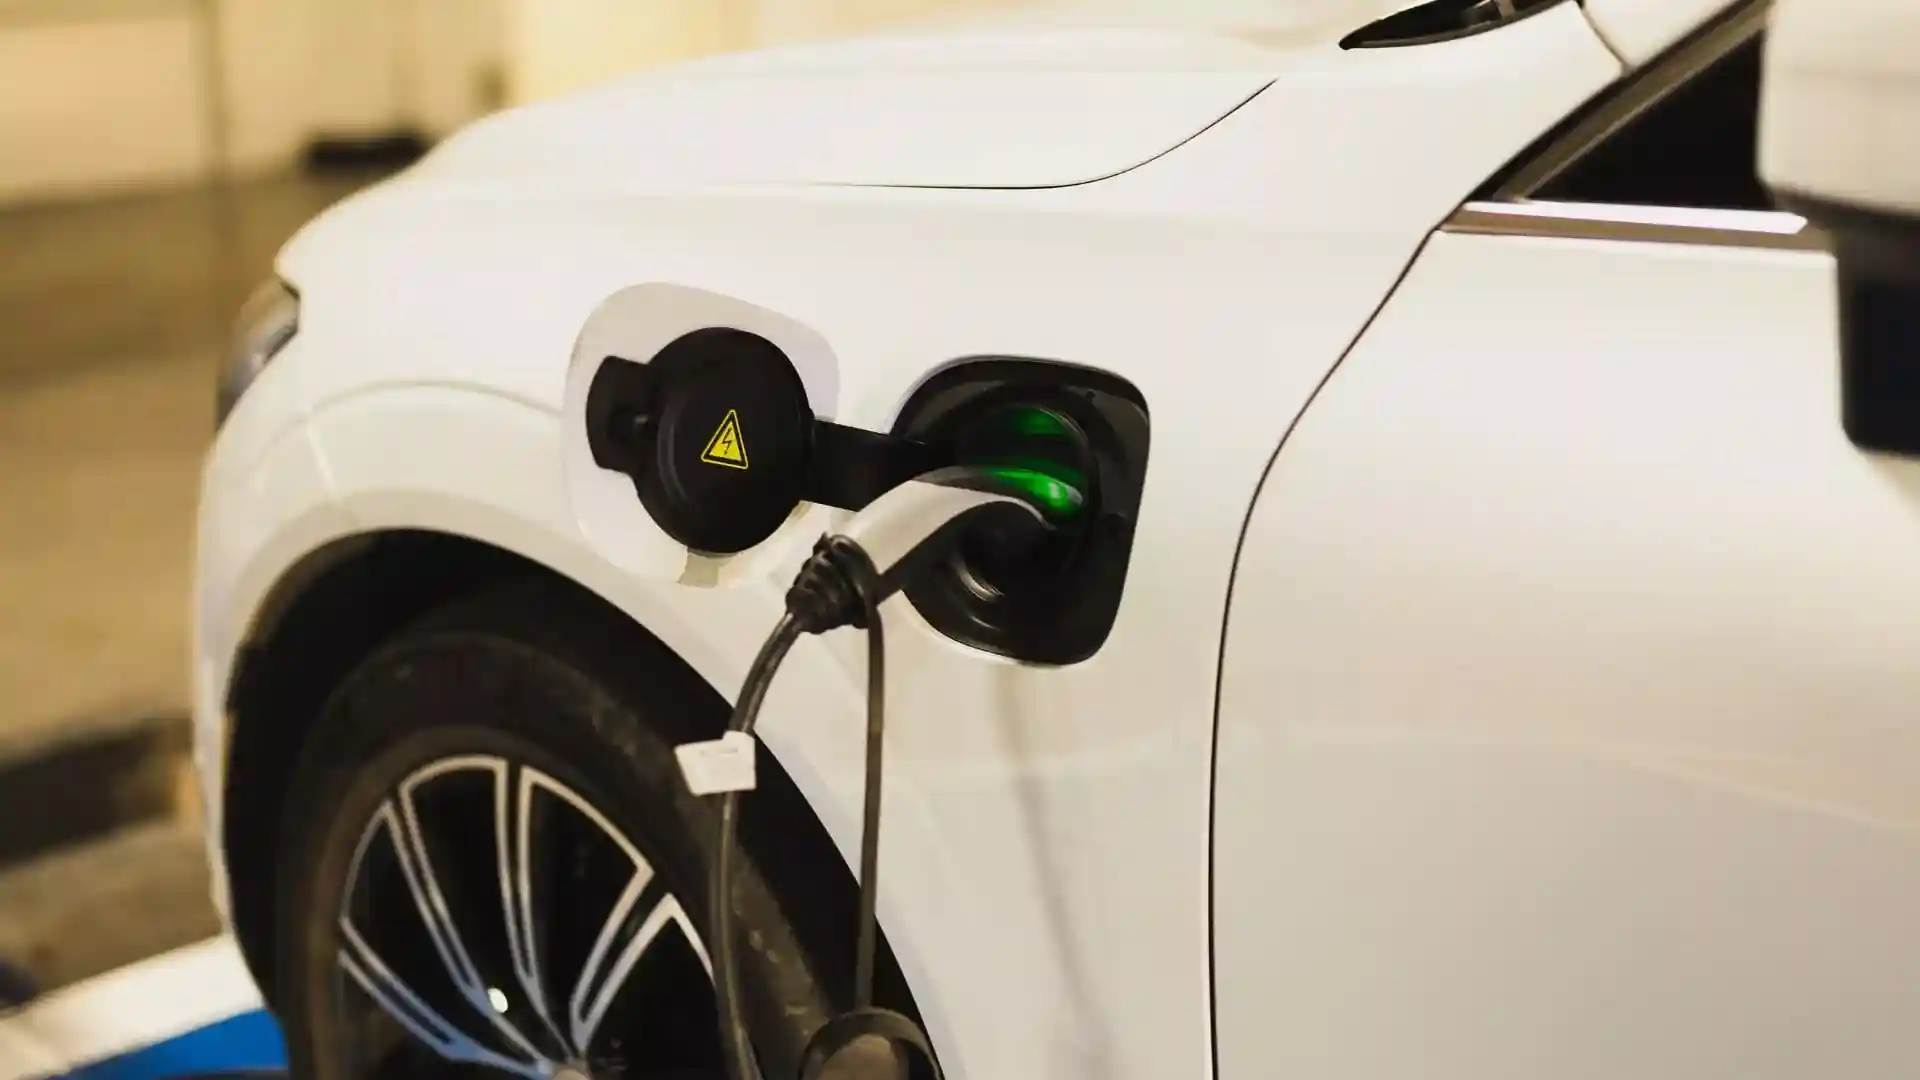 Are Electric Vehicle Technologies The Future Of Transportation?